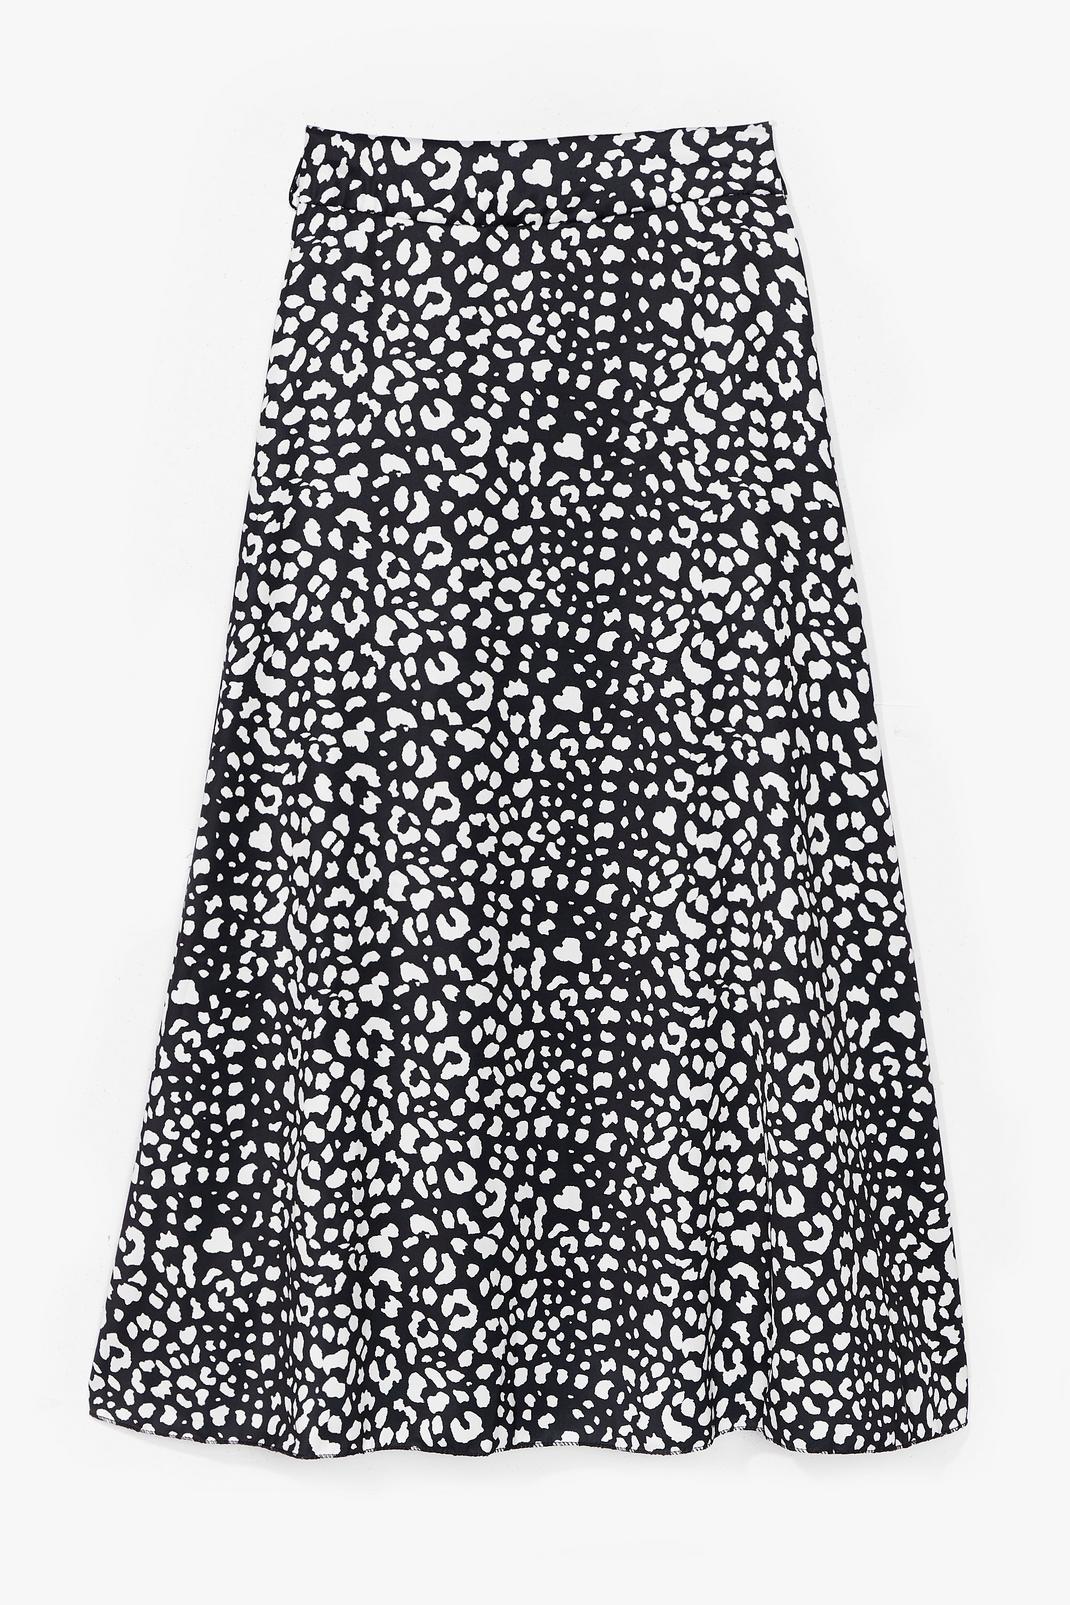 Meow About You Leopard Midi Skirt image number 1